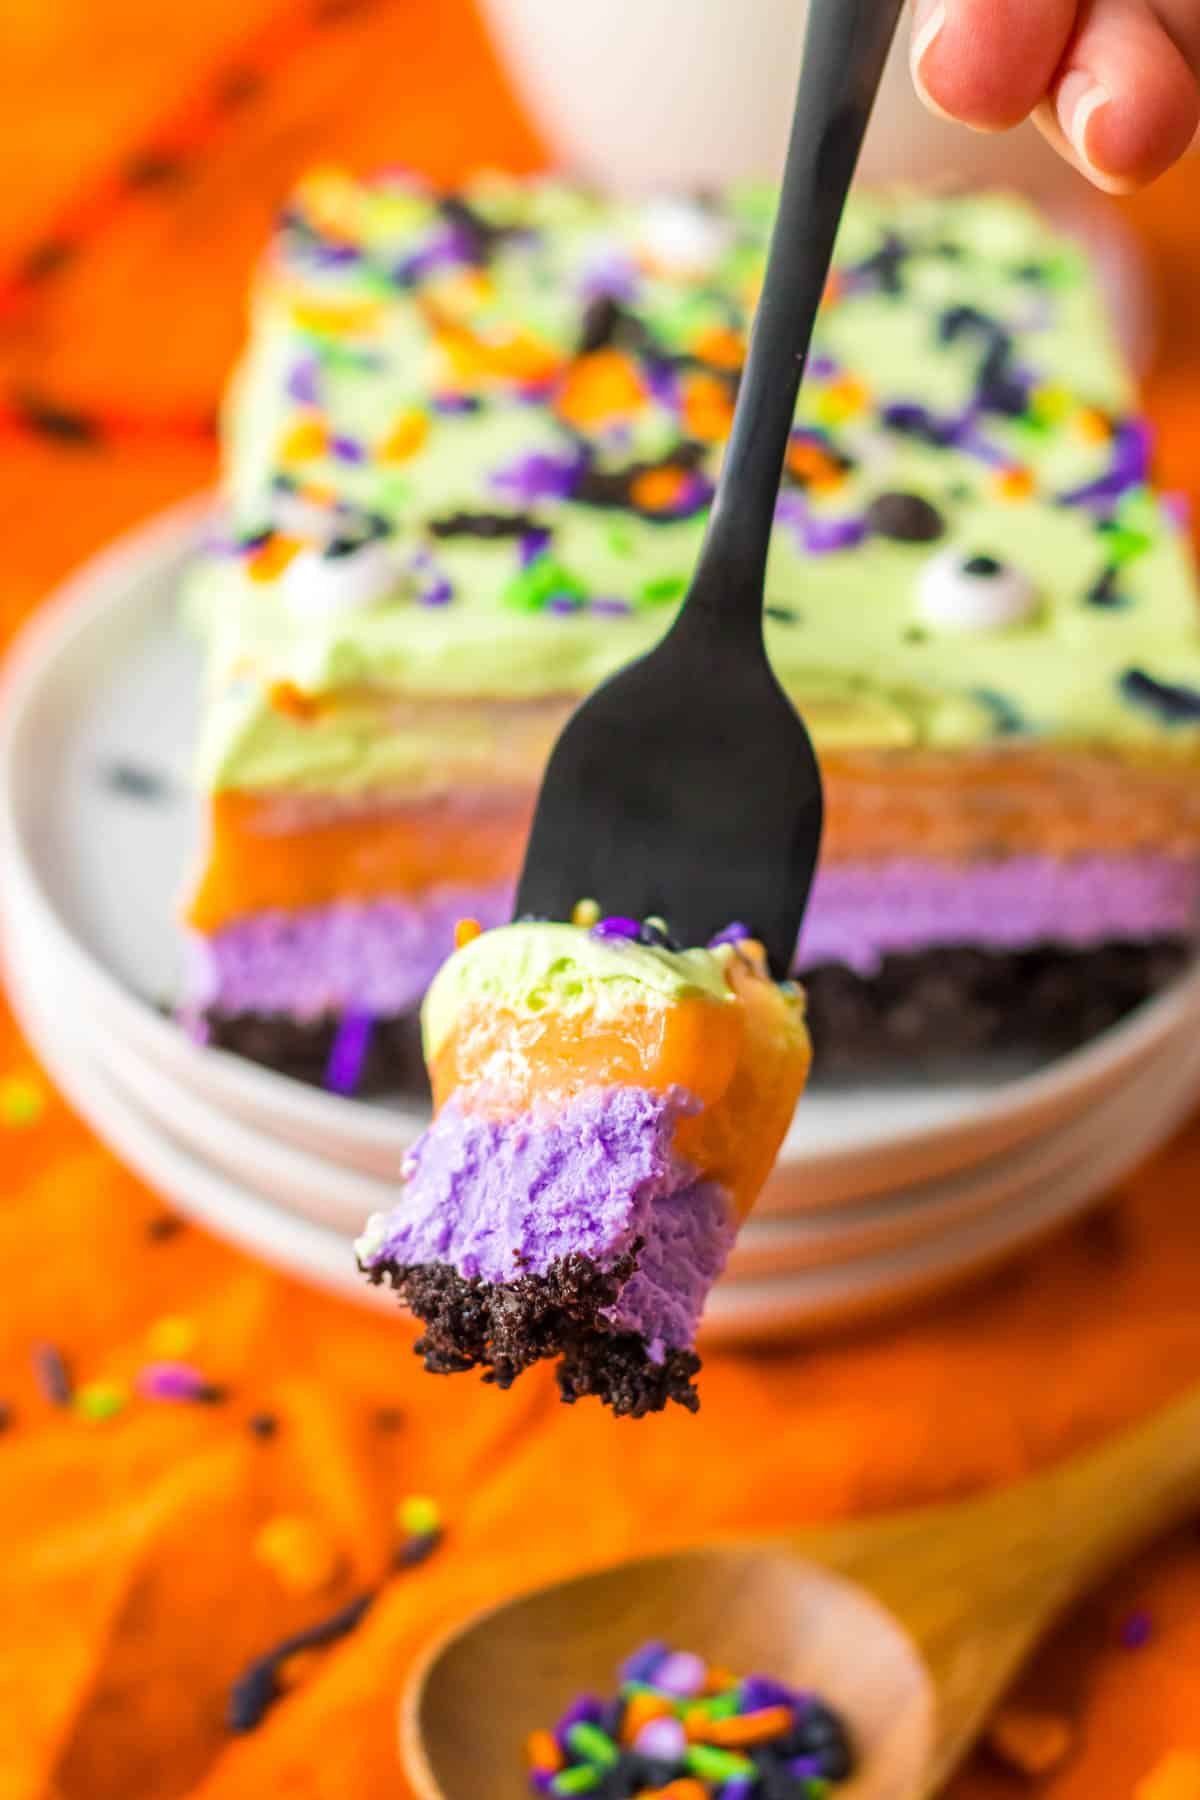 A person is taking a bite out of a halloween ice cream cake.